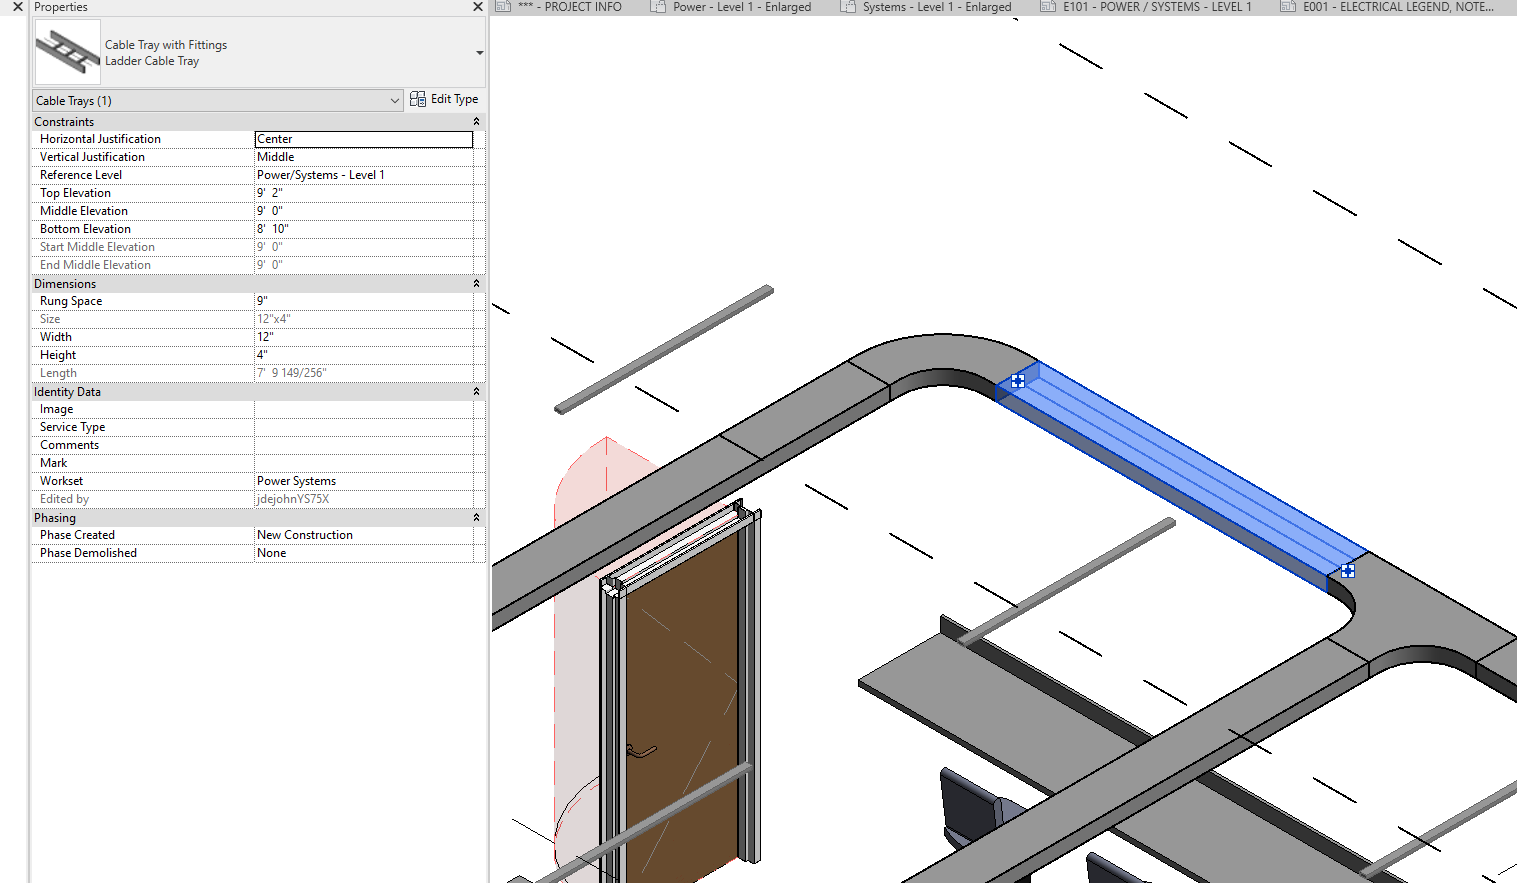 Revit family will not show up on floorplan - Autodesk Community - Revit  Products